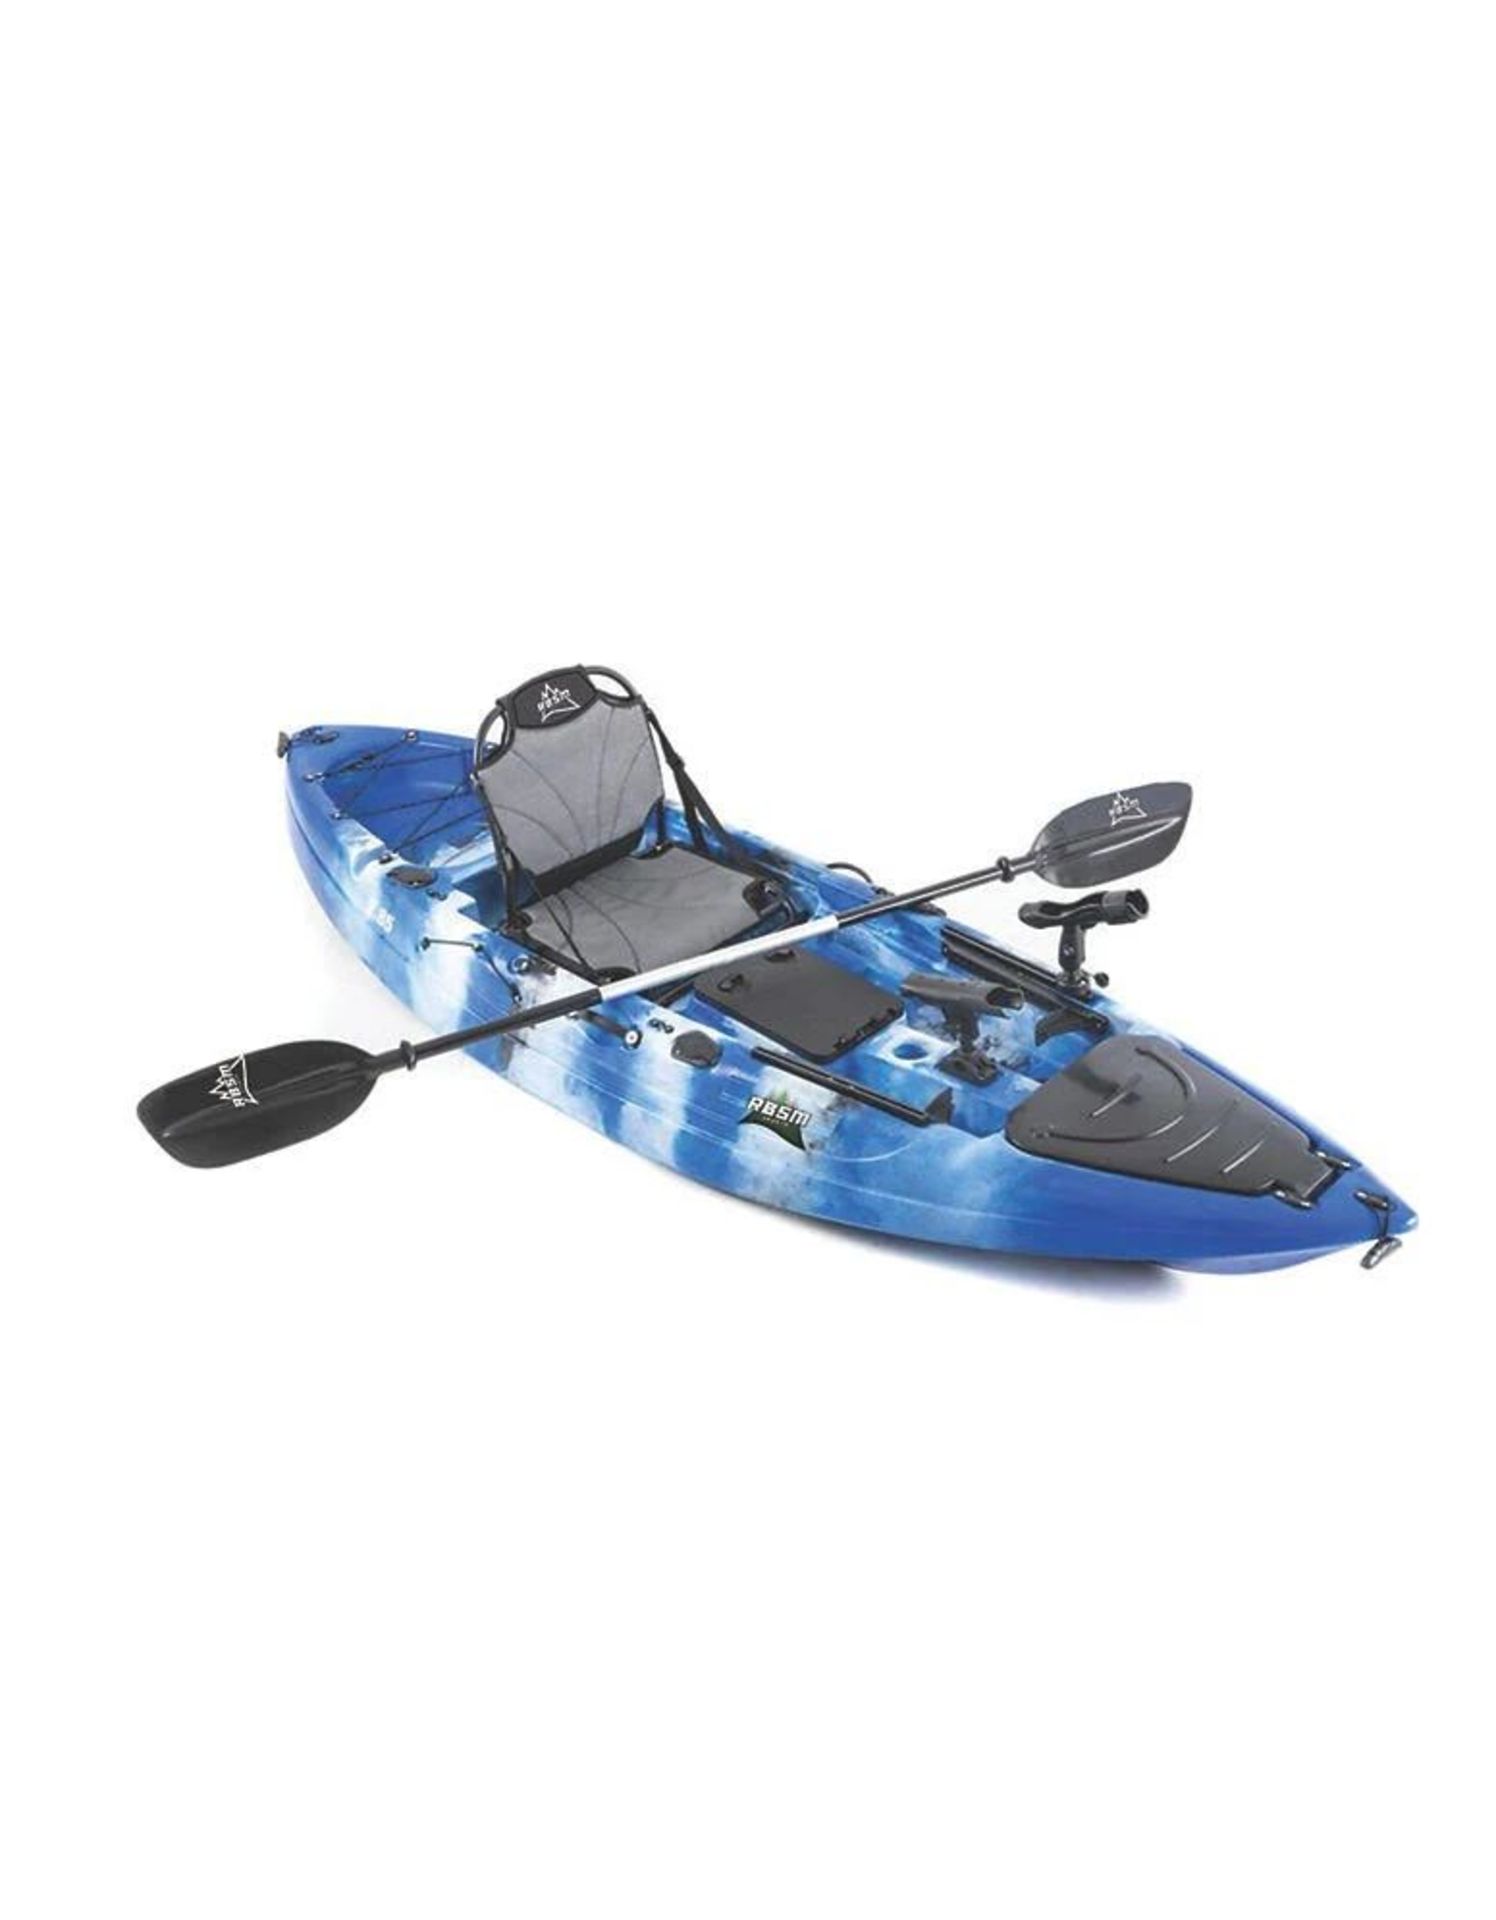 SEA OTTER 1-PERSON RECREATIONAL / FISHING KAYAK (NEW) (MSRP $1,800)